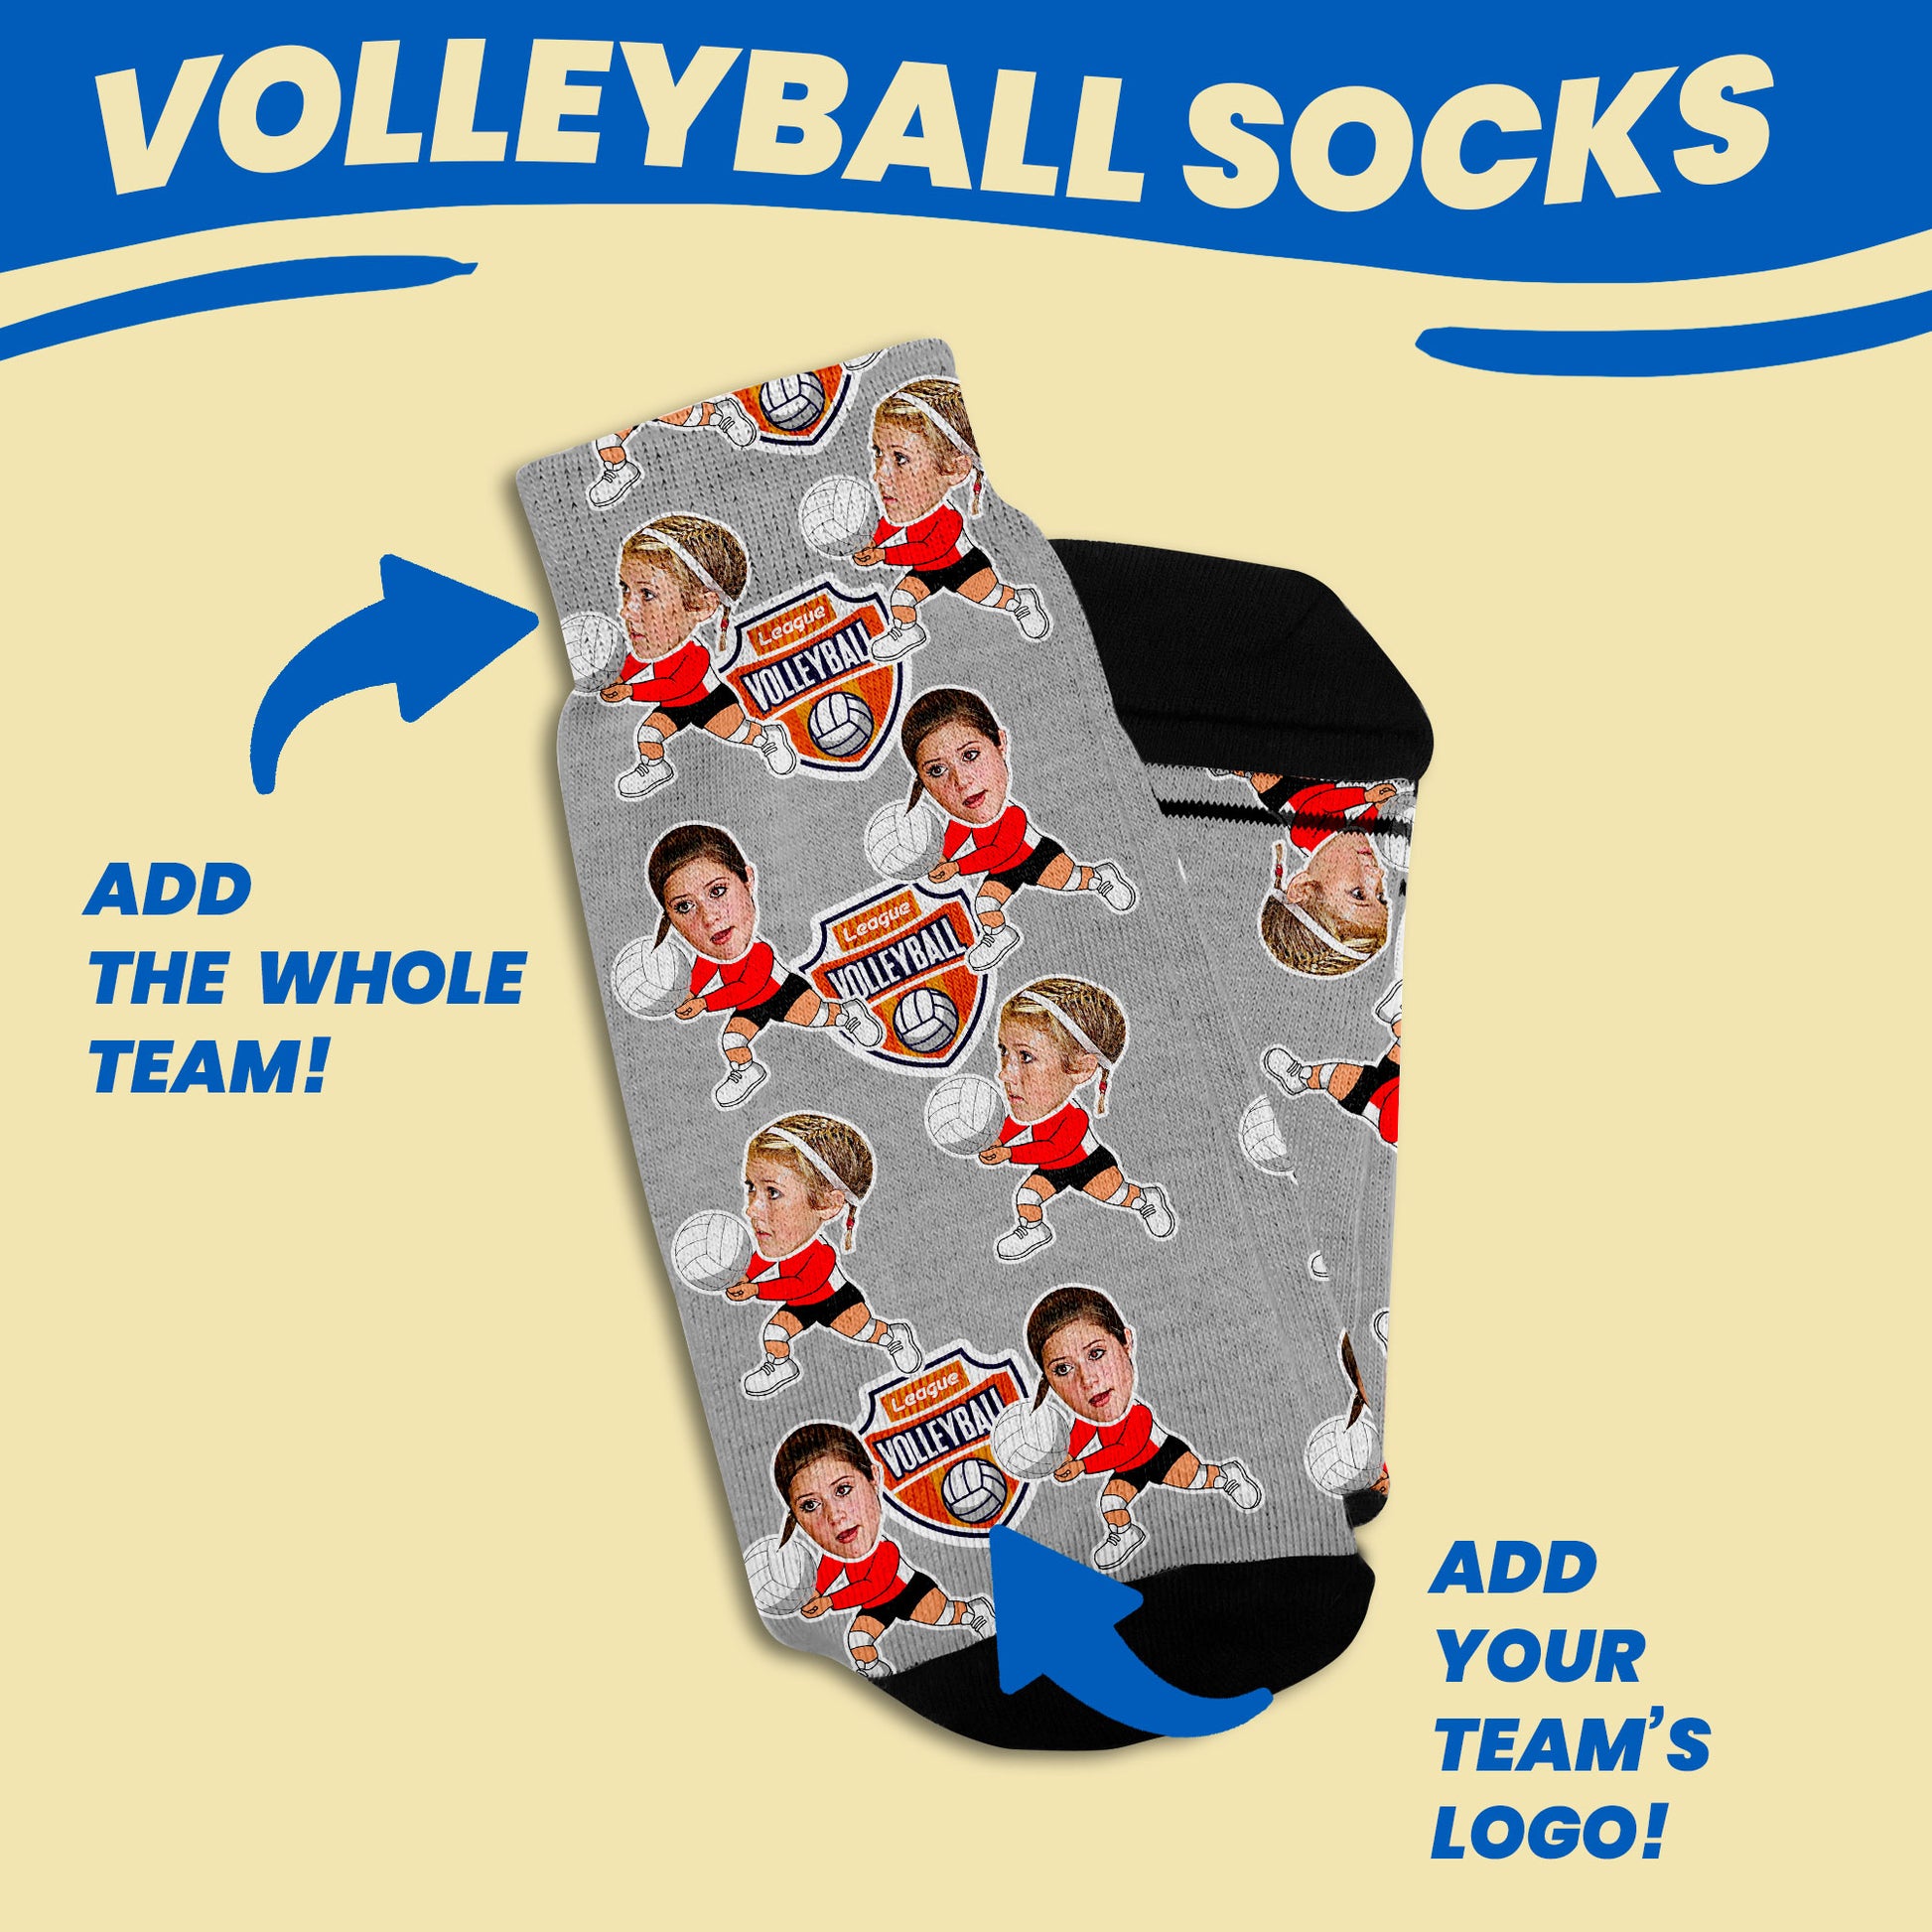 personalized volleyball socks with players faces and cartoon bodies where you can add your team logo